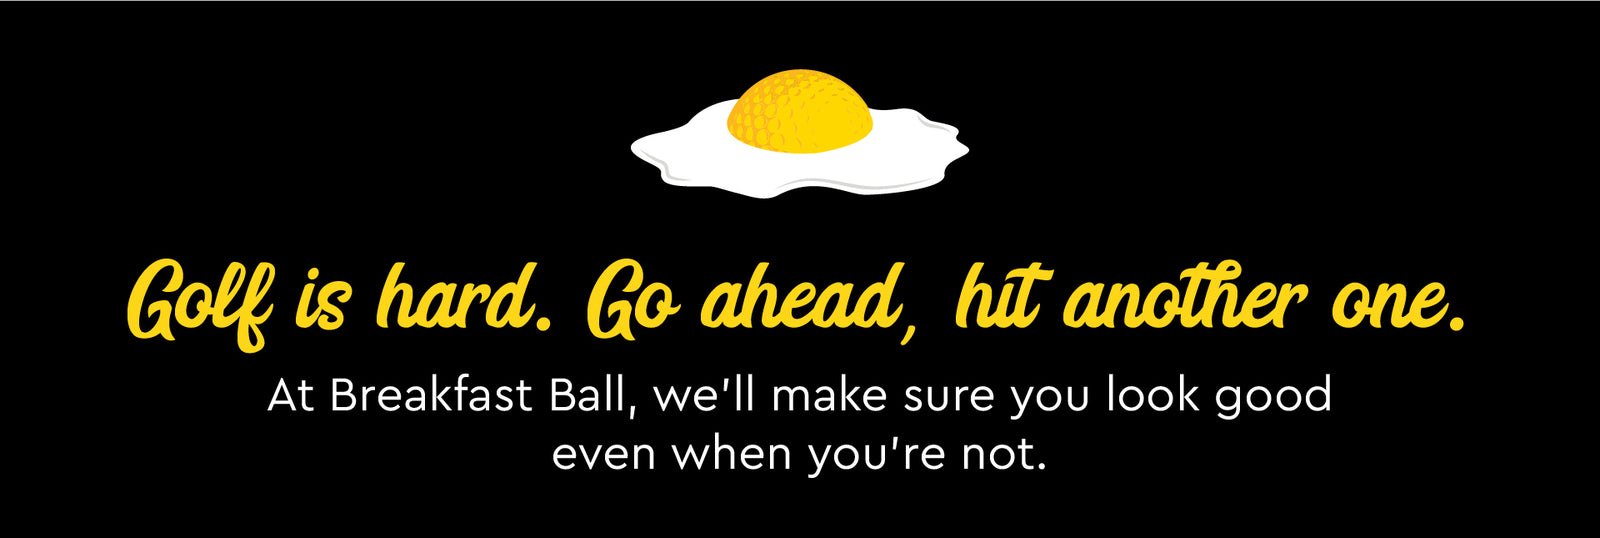 Golf is hard. Go ahead, hit another one. At Breakfast Ball, we'll make sure you look good even when you're not.